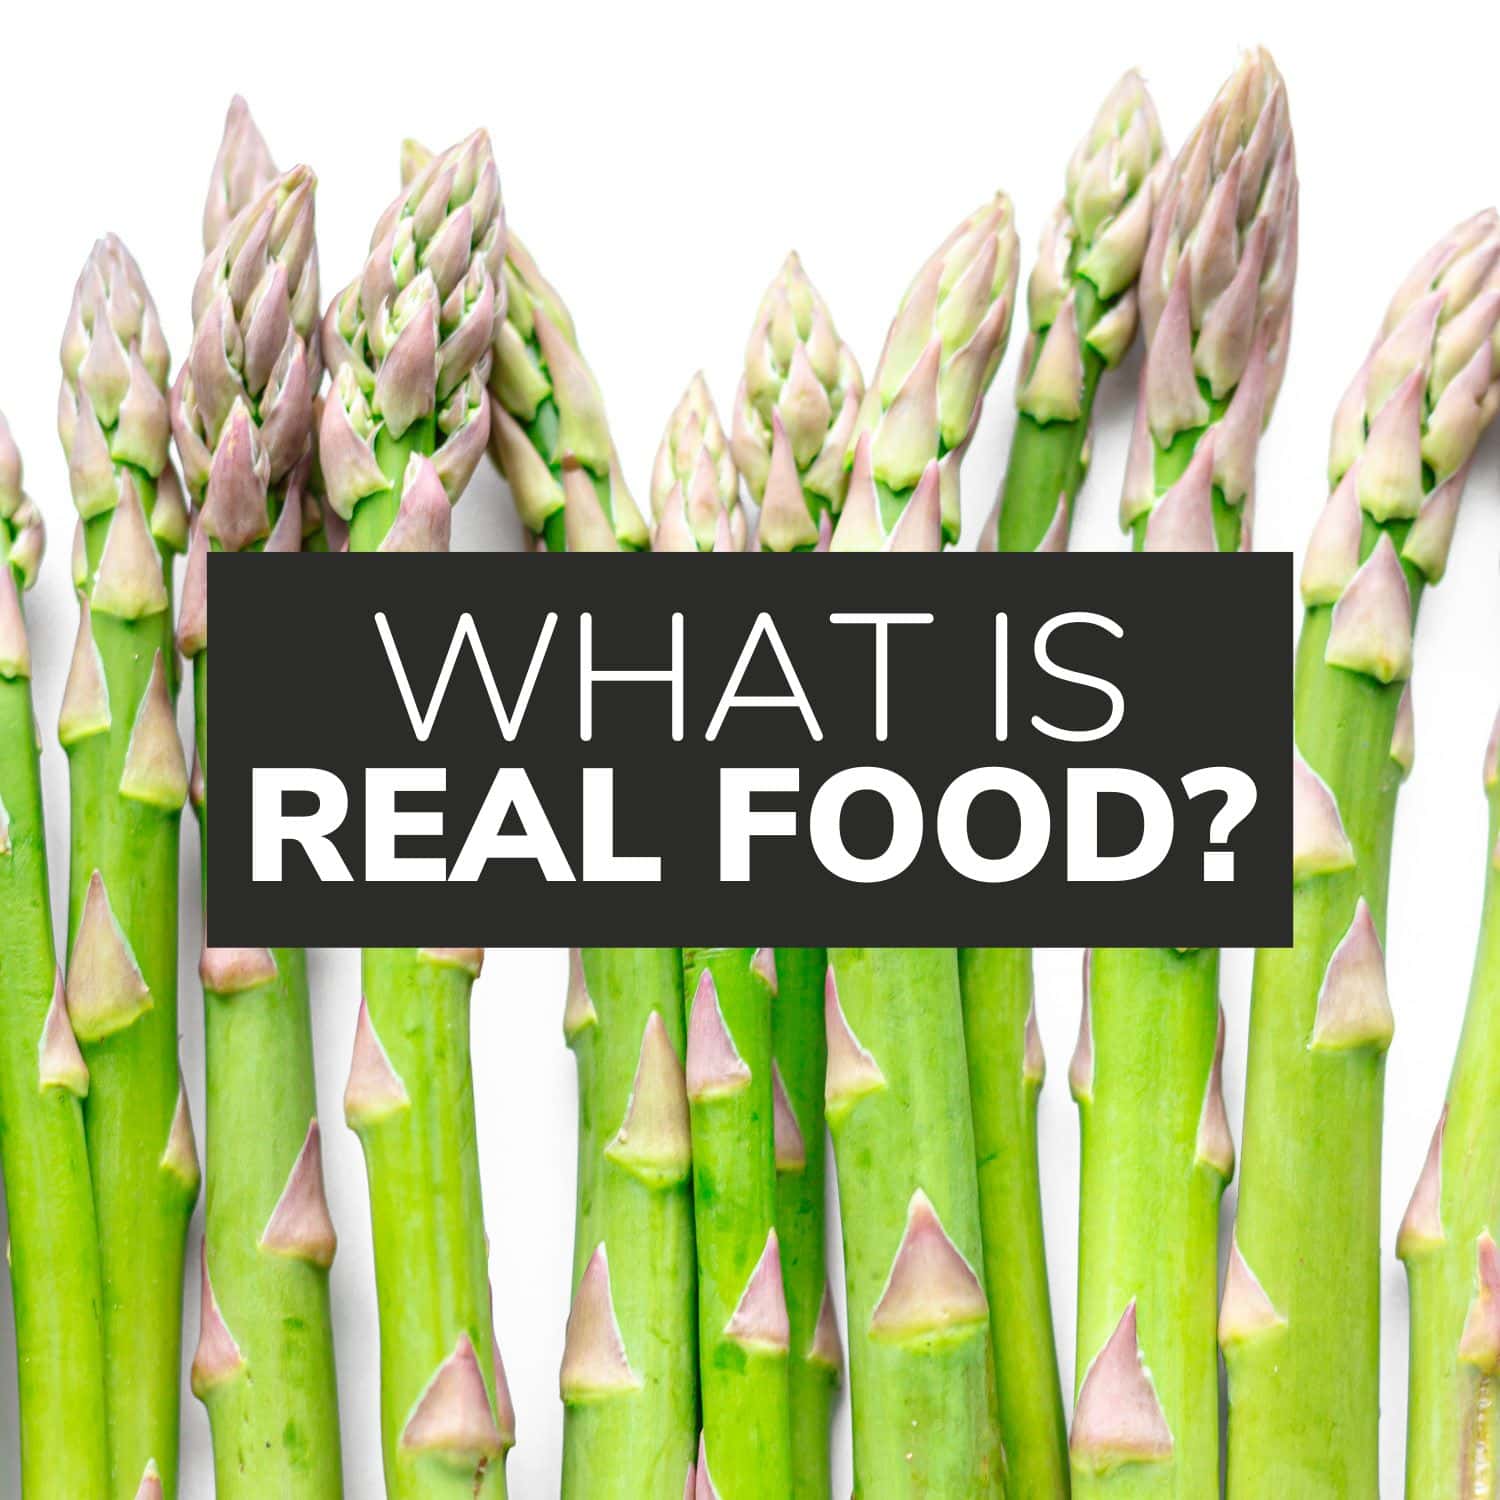 Asparagus stalks with text overlay that reads "What Is Real Food?".